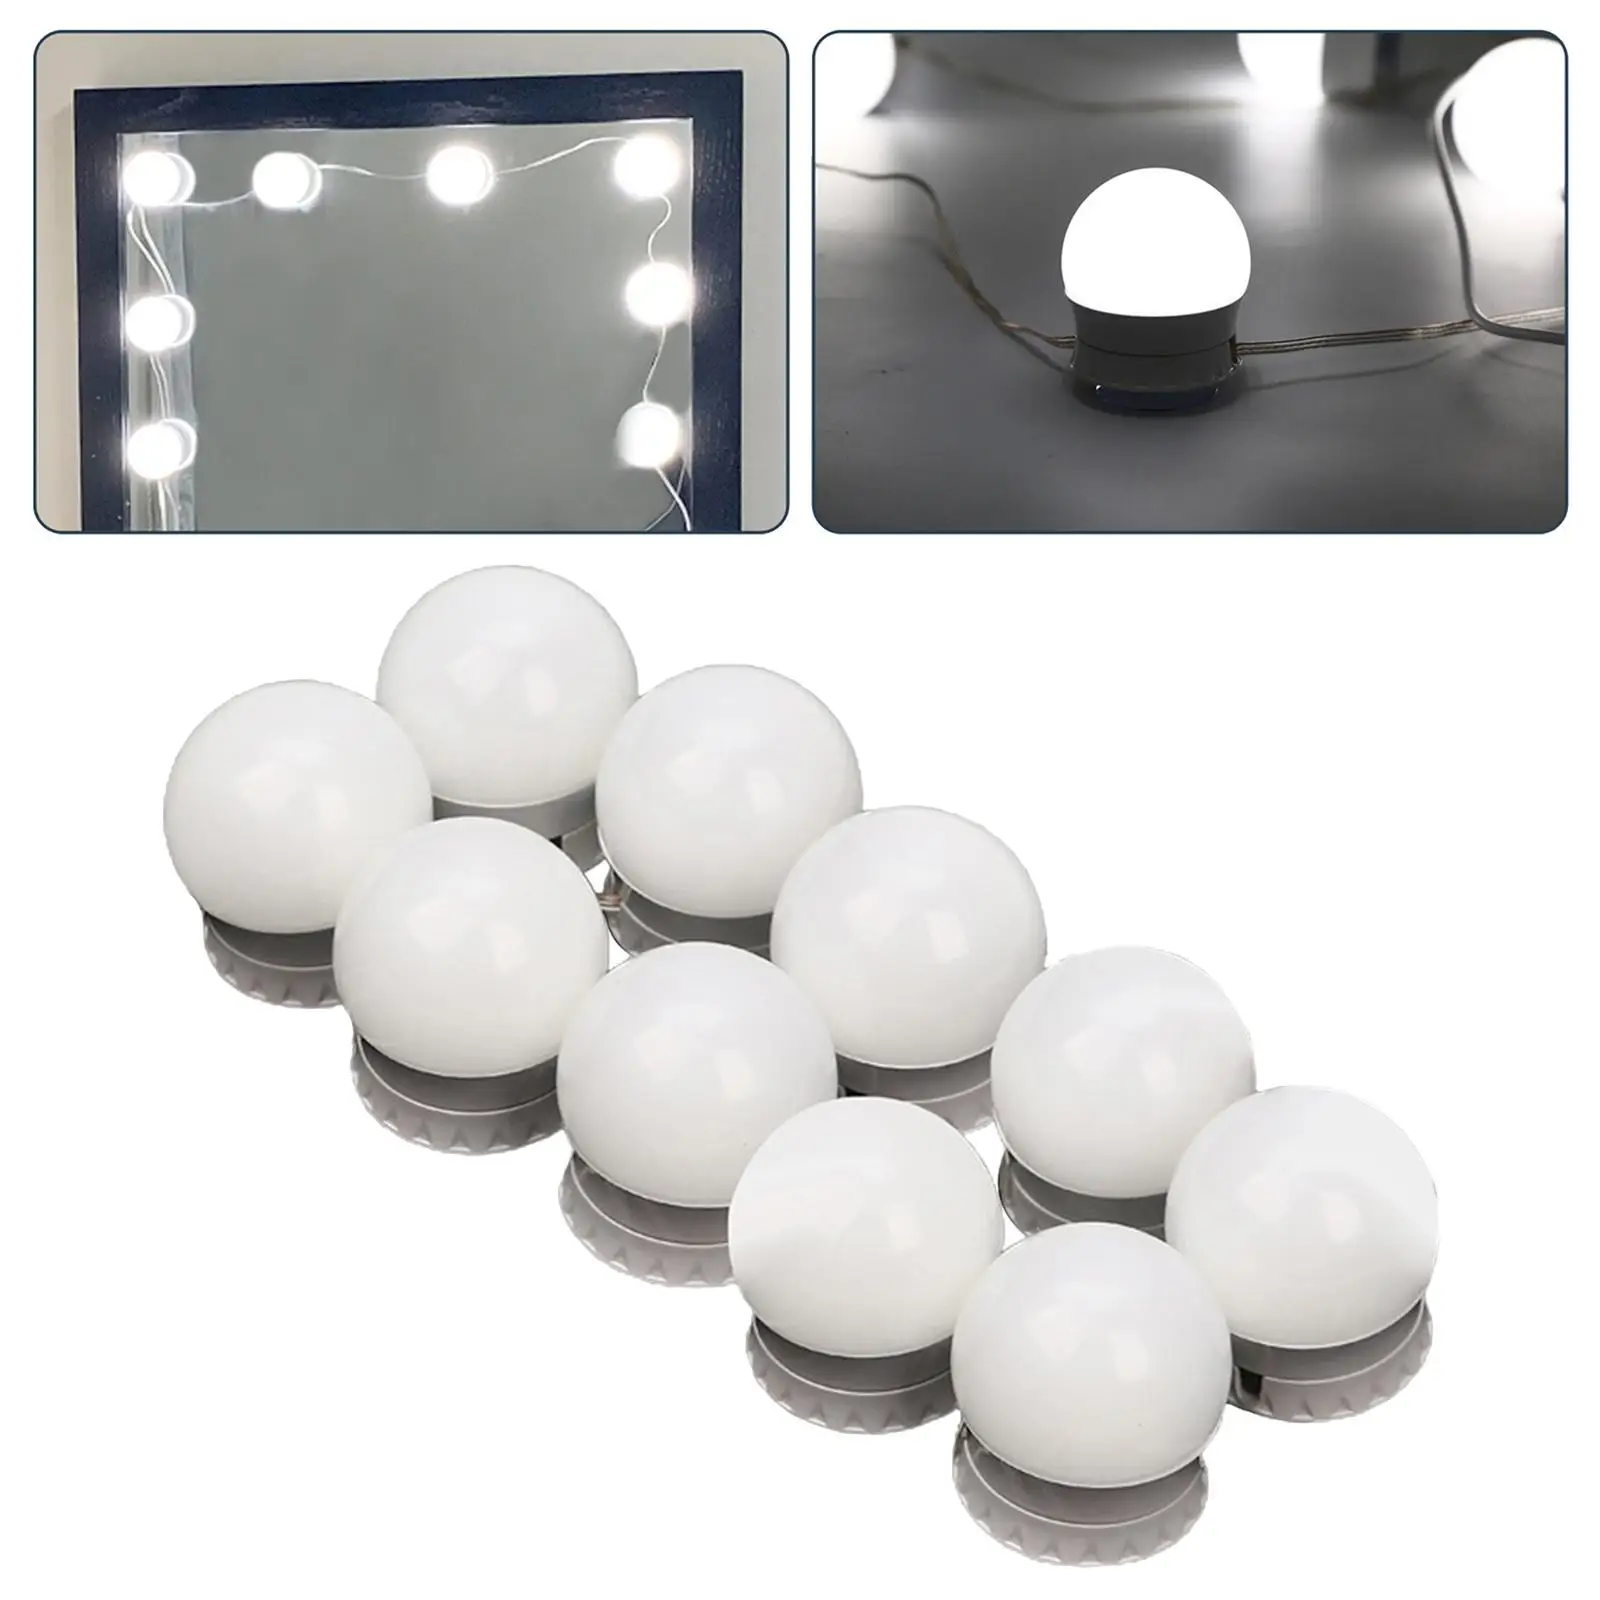 Studio Glow Vanity Make Up Light Super Bright 10 LED Bulbs Battery Powered with Suction Cups